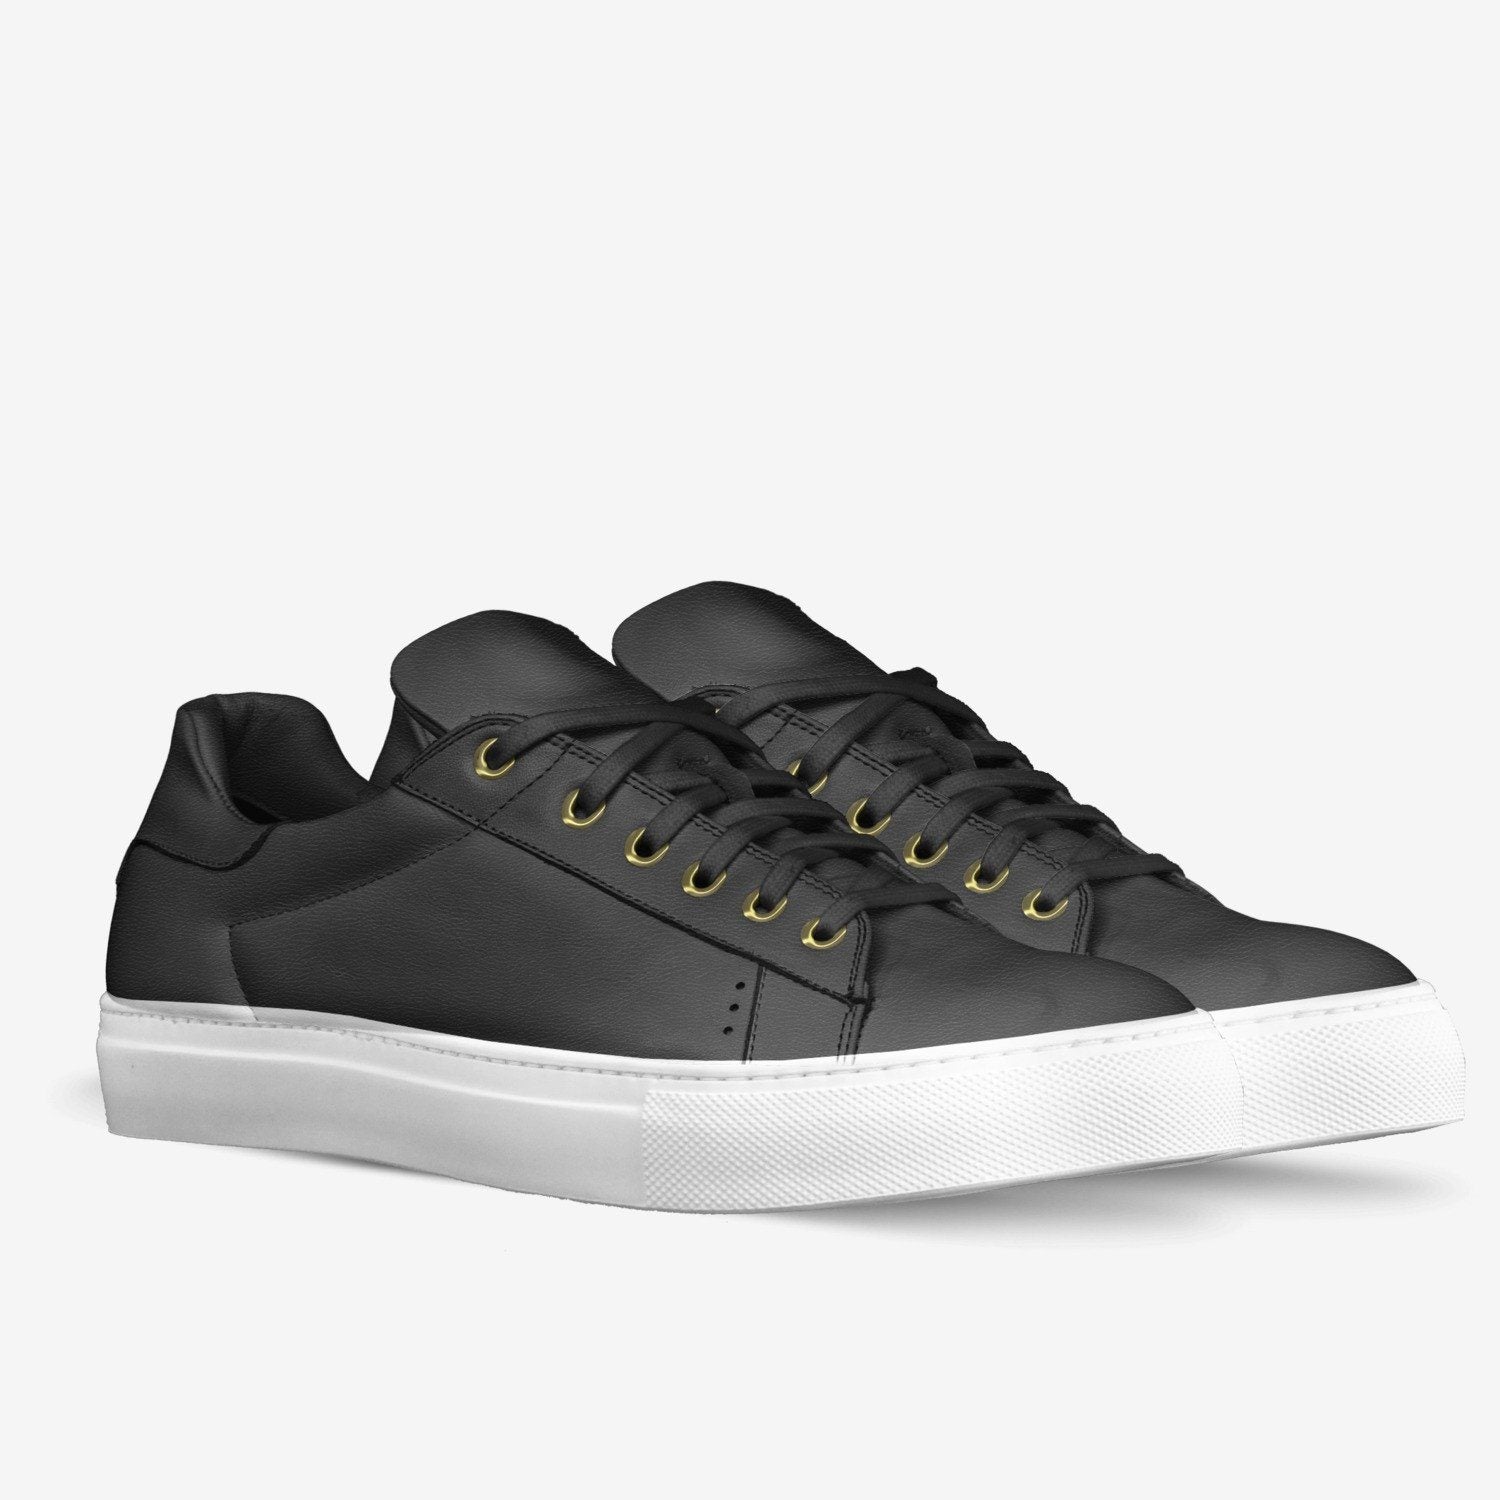 LORENZO LEATHER SNEAKERS IN BLACK | Poor Little Rich Boy Clothing